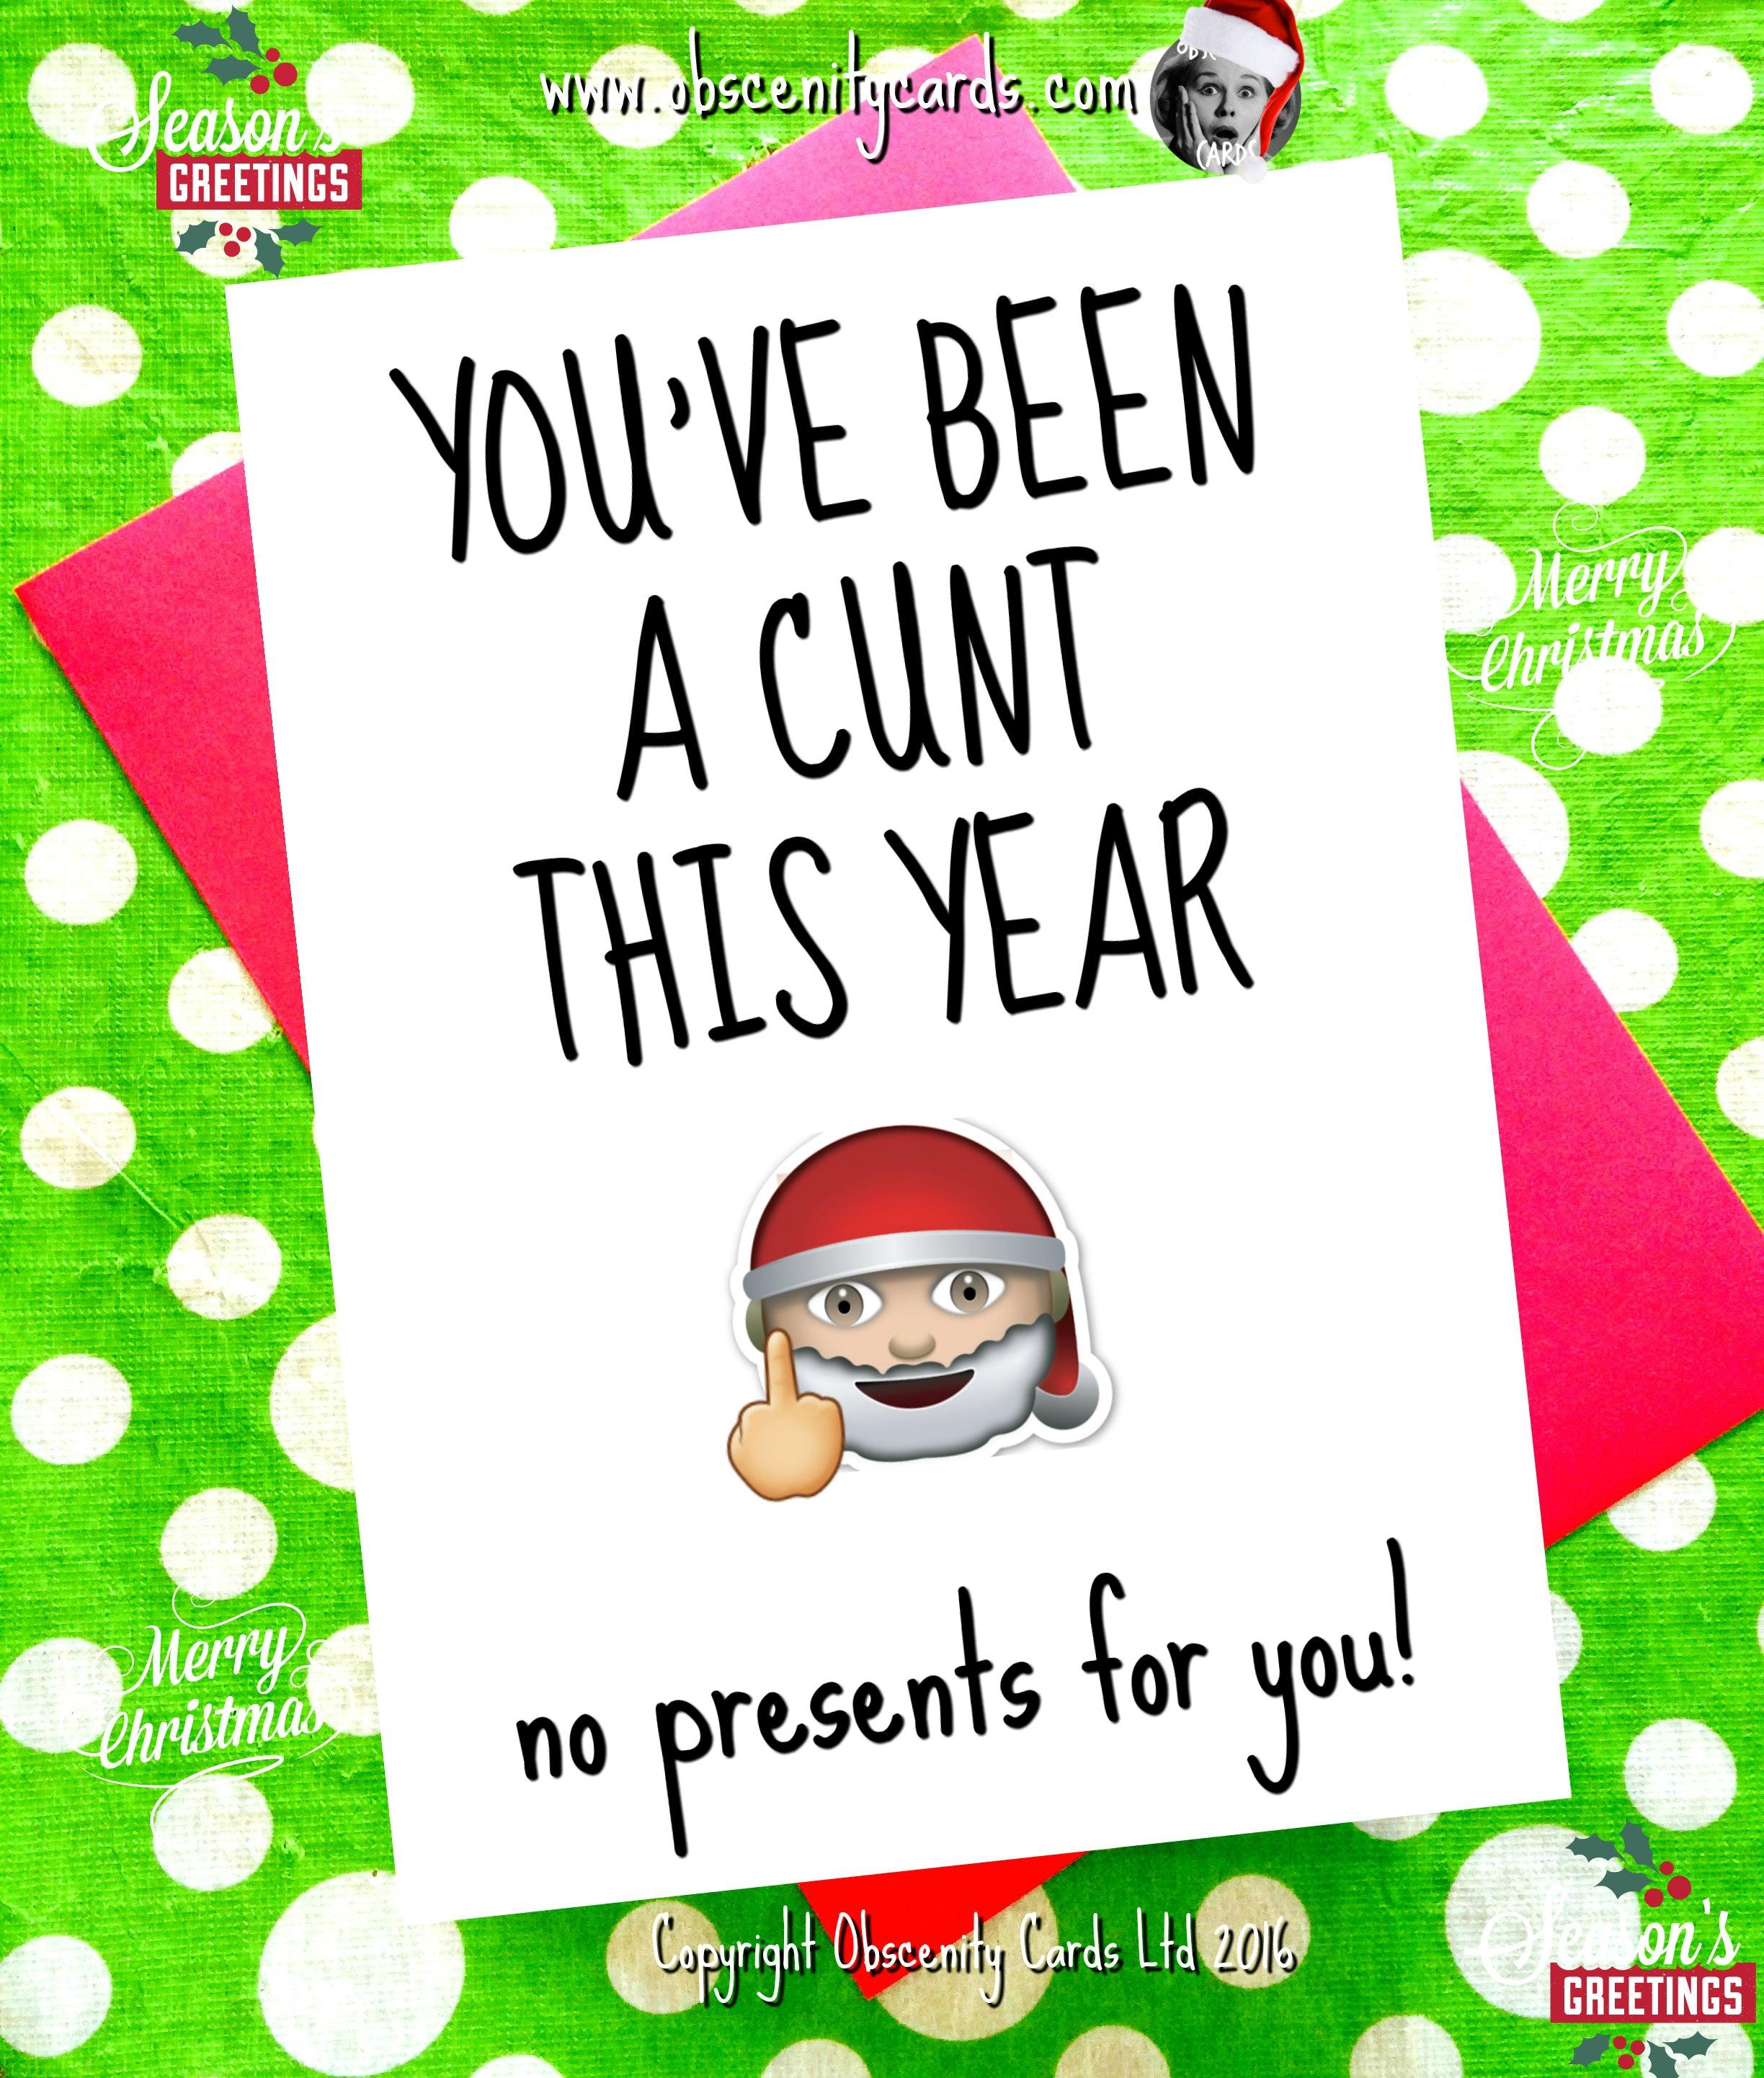 Funny Christmas Card - You've been a cunt this year! No presents for you